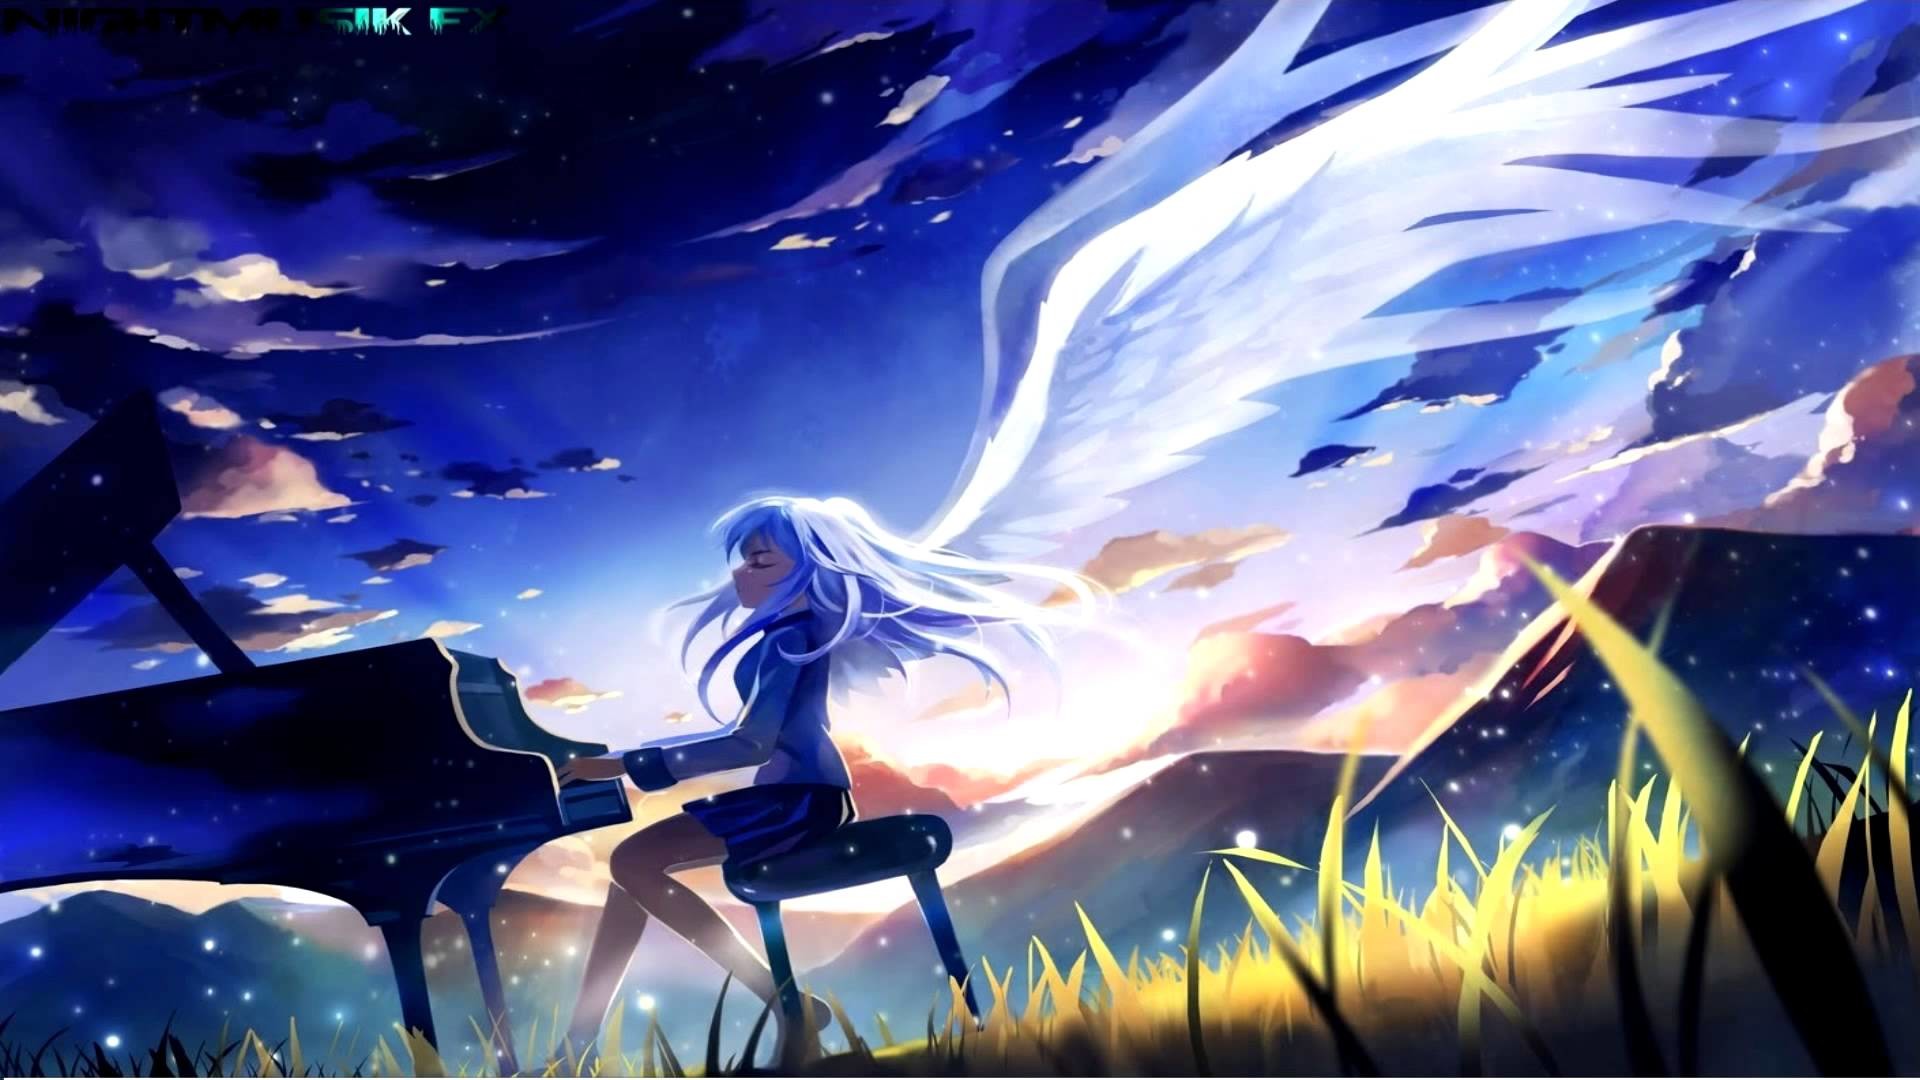 1920x1080 Anime Wallpapers HD  Group (62 ) Full HD 1080p Anime Wallpapers,  Desktop Backgrounds HD, ...